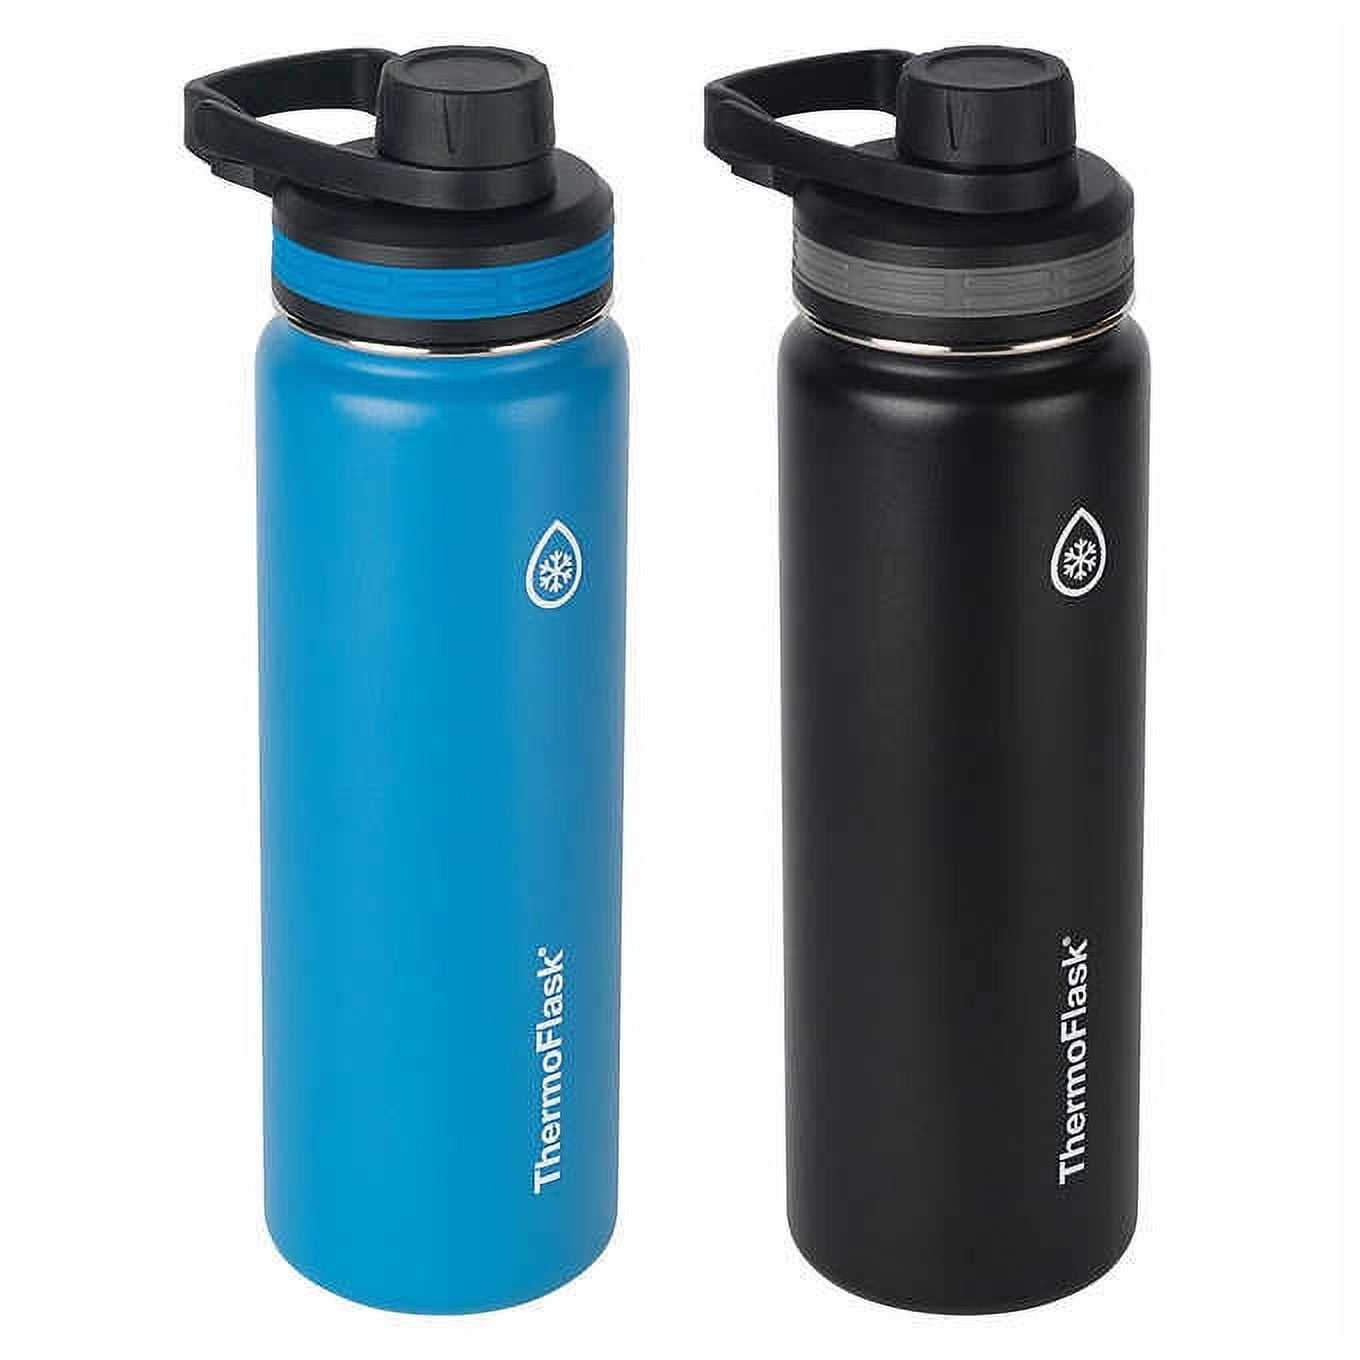 Thermoflask Stainless Steel 24oz Water Bottle, 2-pack (Light Blue